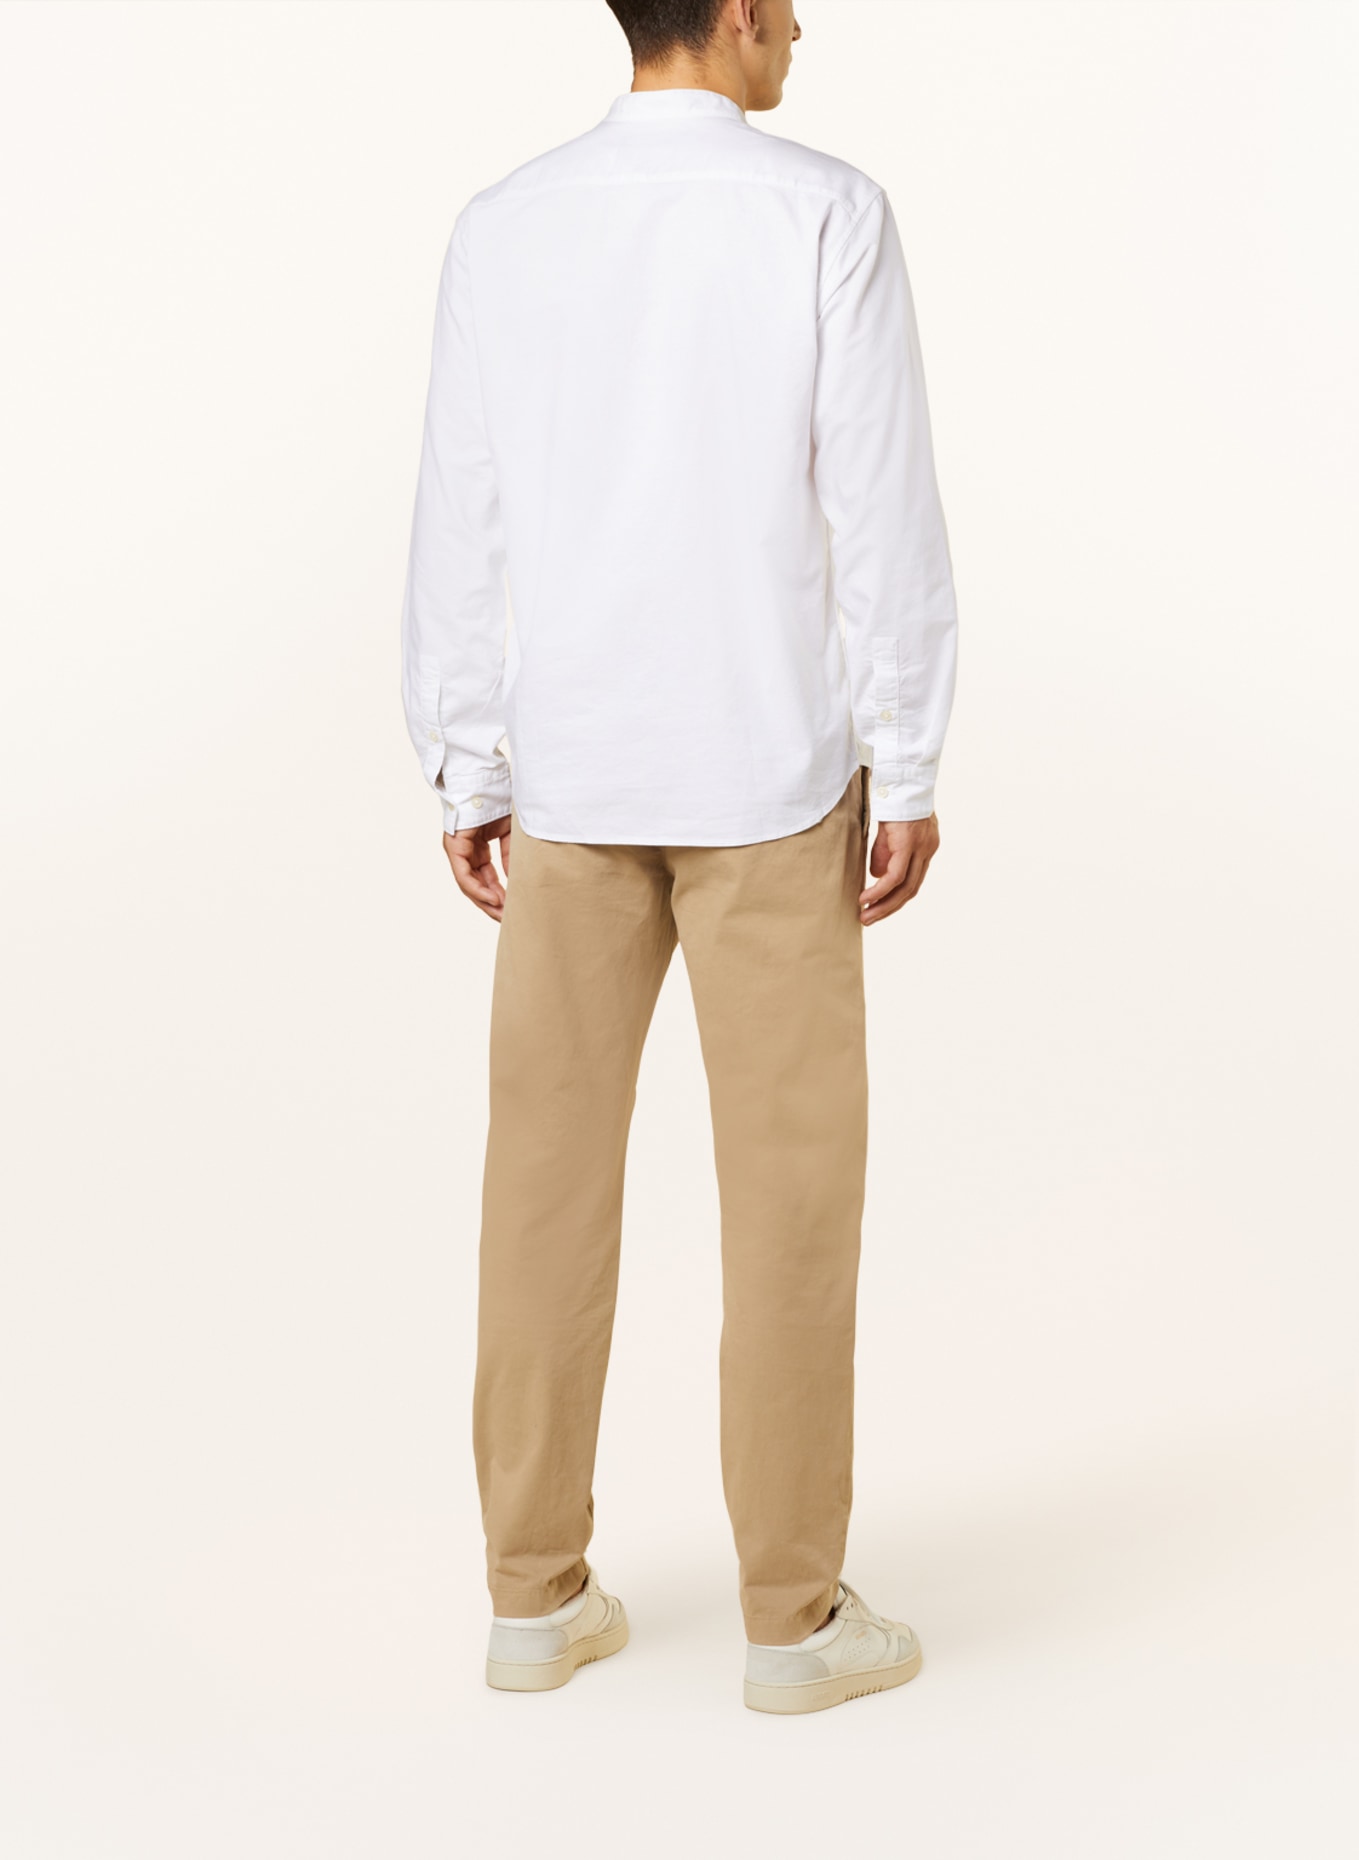 Marc O'Polo Shirt regular fit with stand-up collar, Color: WHITE (Image 3)